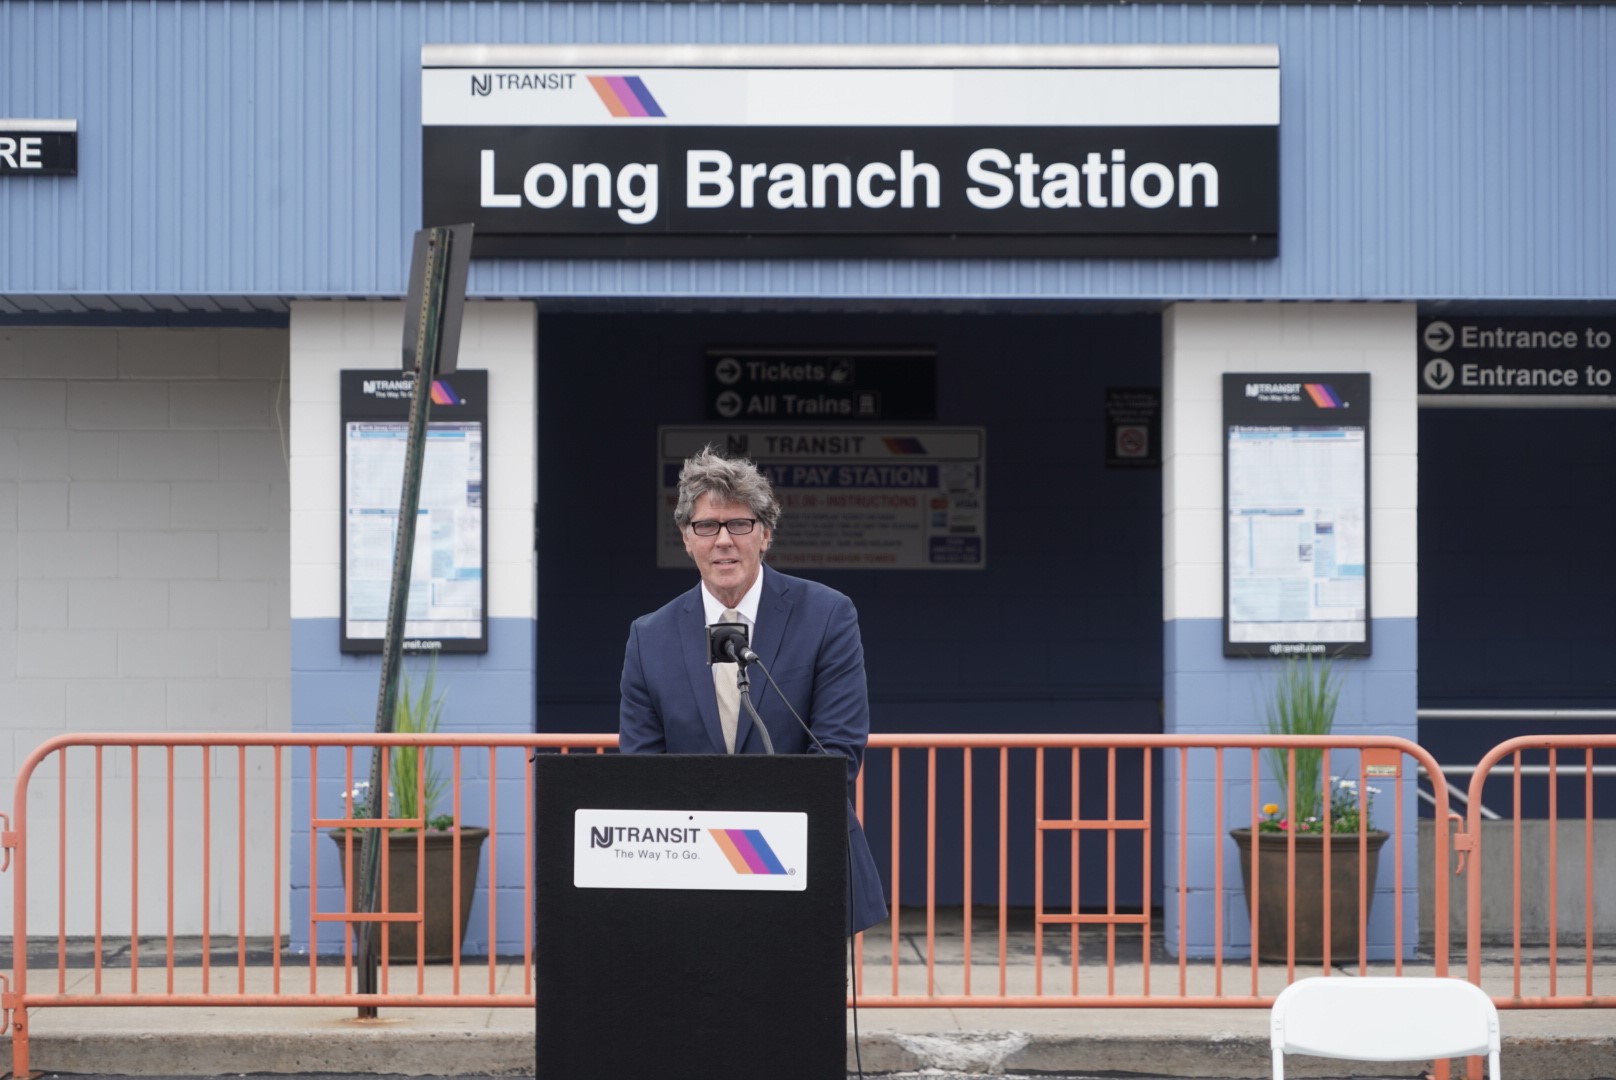 NJ TRANSIT on X: The changes include additional summer service on